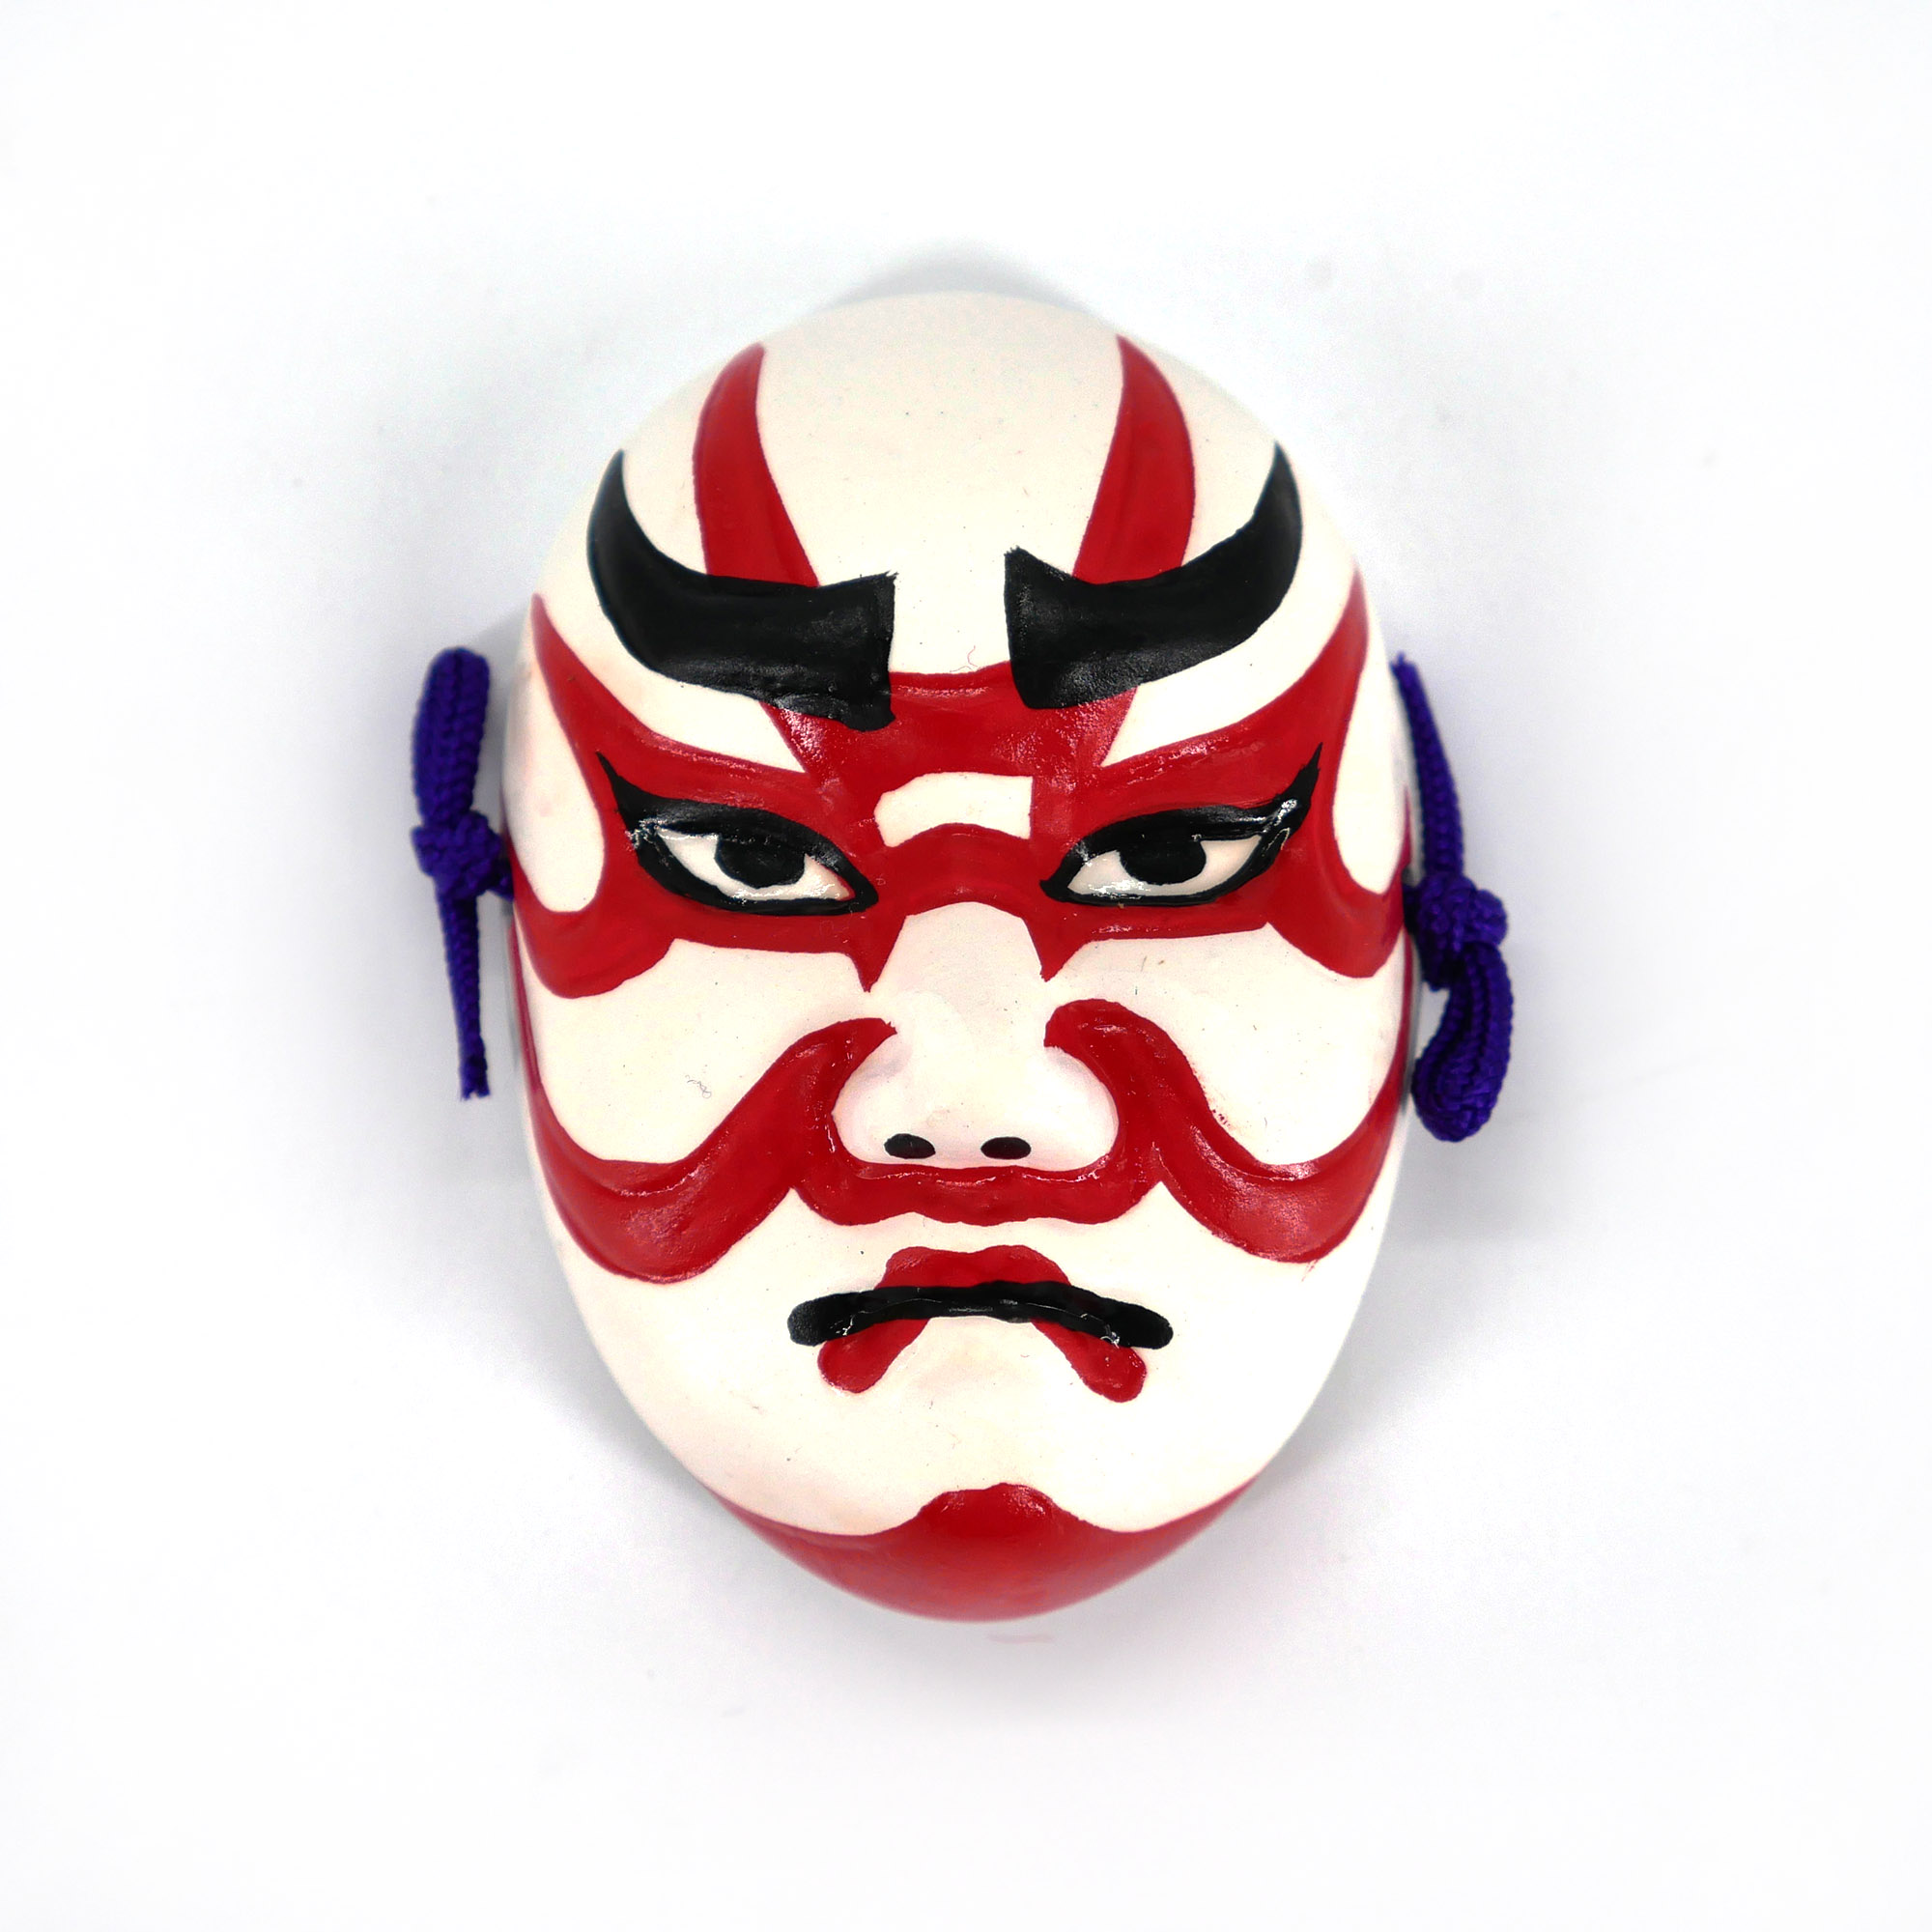 Mini noh mask representing a traditional white and red ceramic